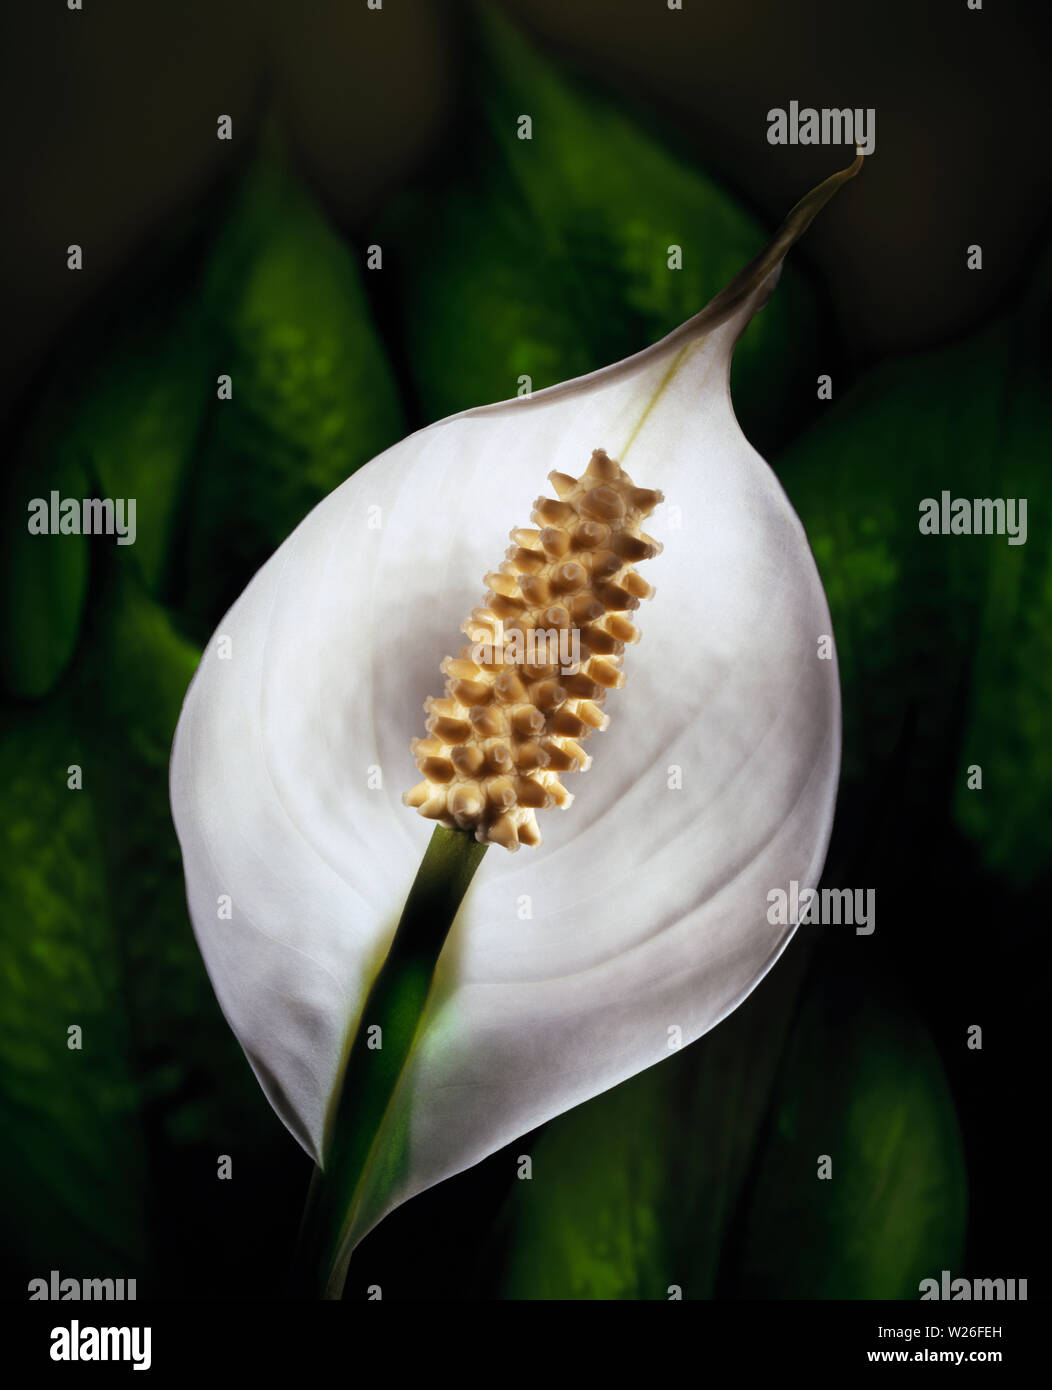 A close up of a peace lily, from a series of light painted floral bloom still lifes in studio. Stock Photo